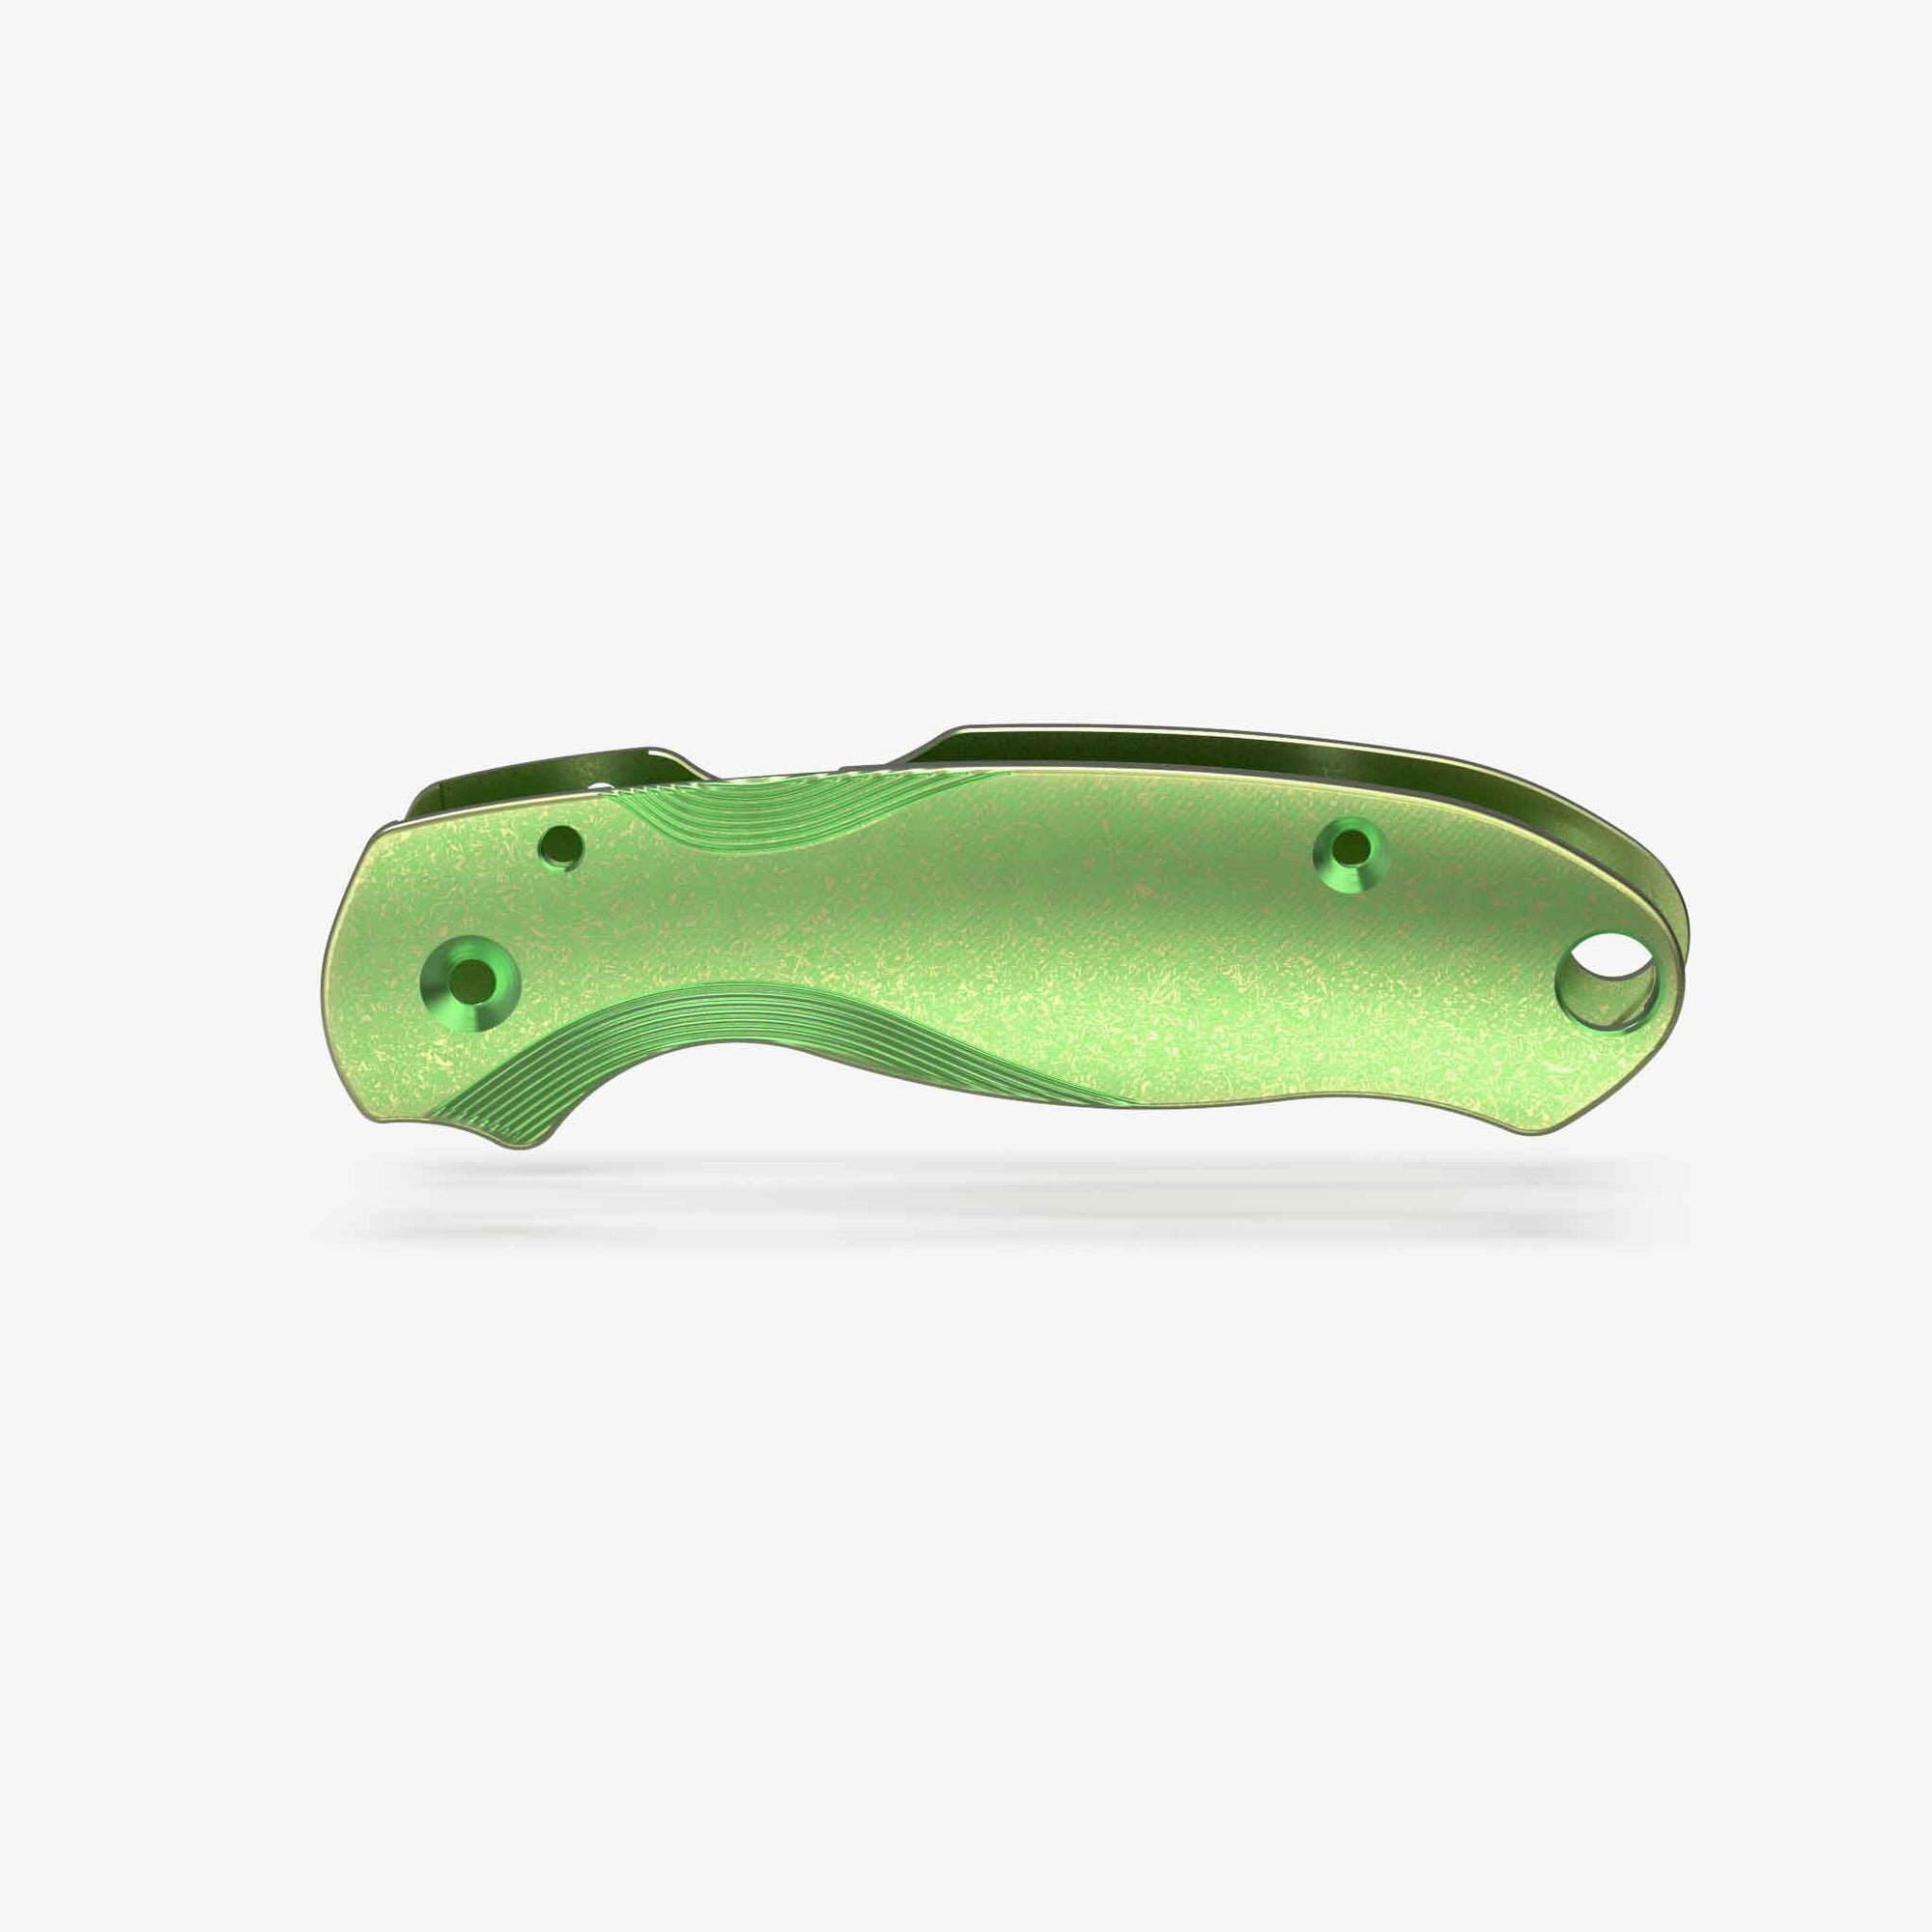 Limited Edition Planetary Series Lotus Titanium Scales for Spyderco Para 3 Knife-Terra Firma